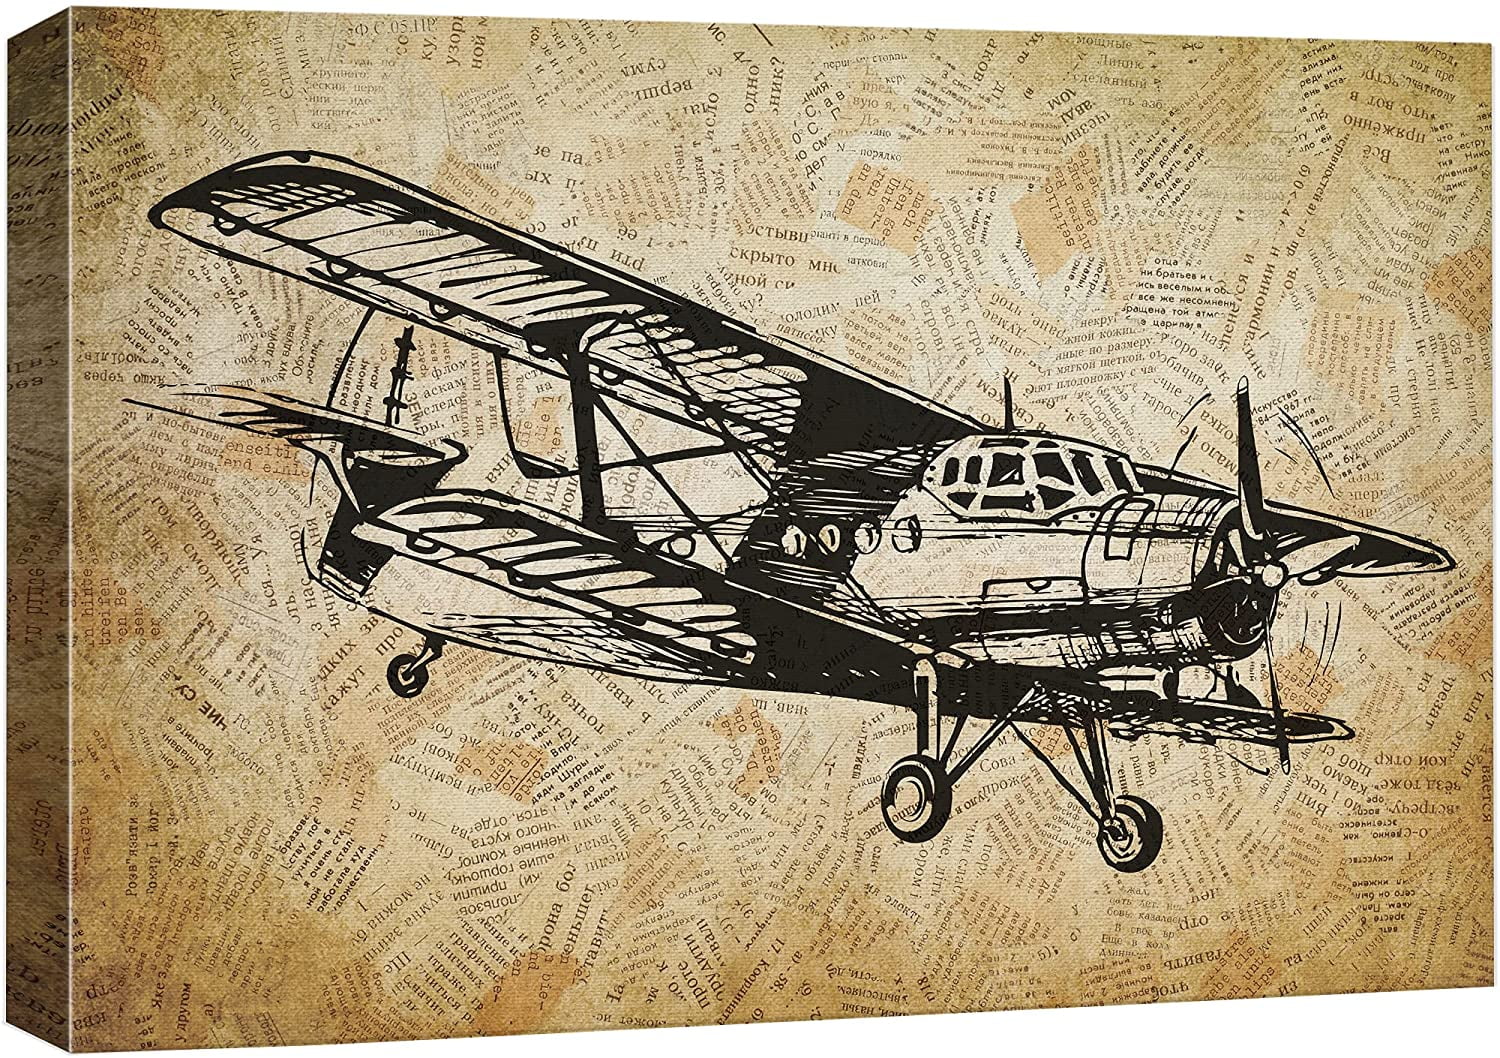 Draw a Biplane by Diana-Huang on DeviantArt